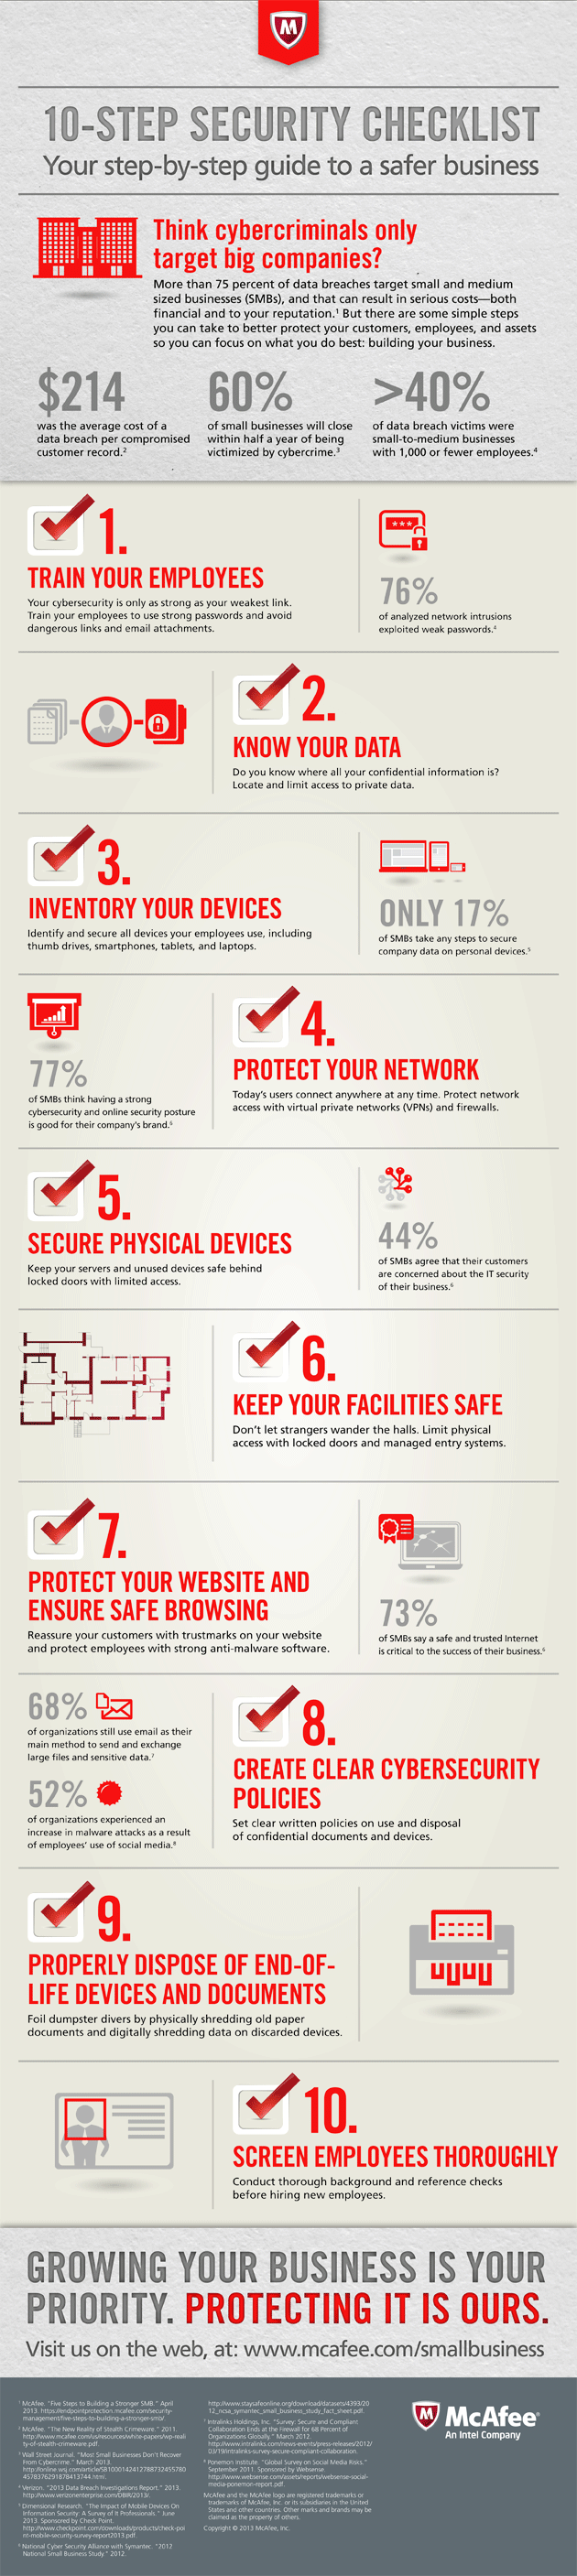 McAfee 10 Steps Security Infographic